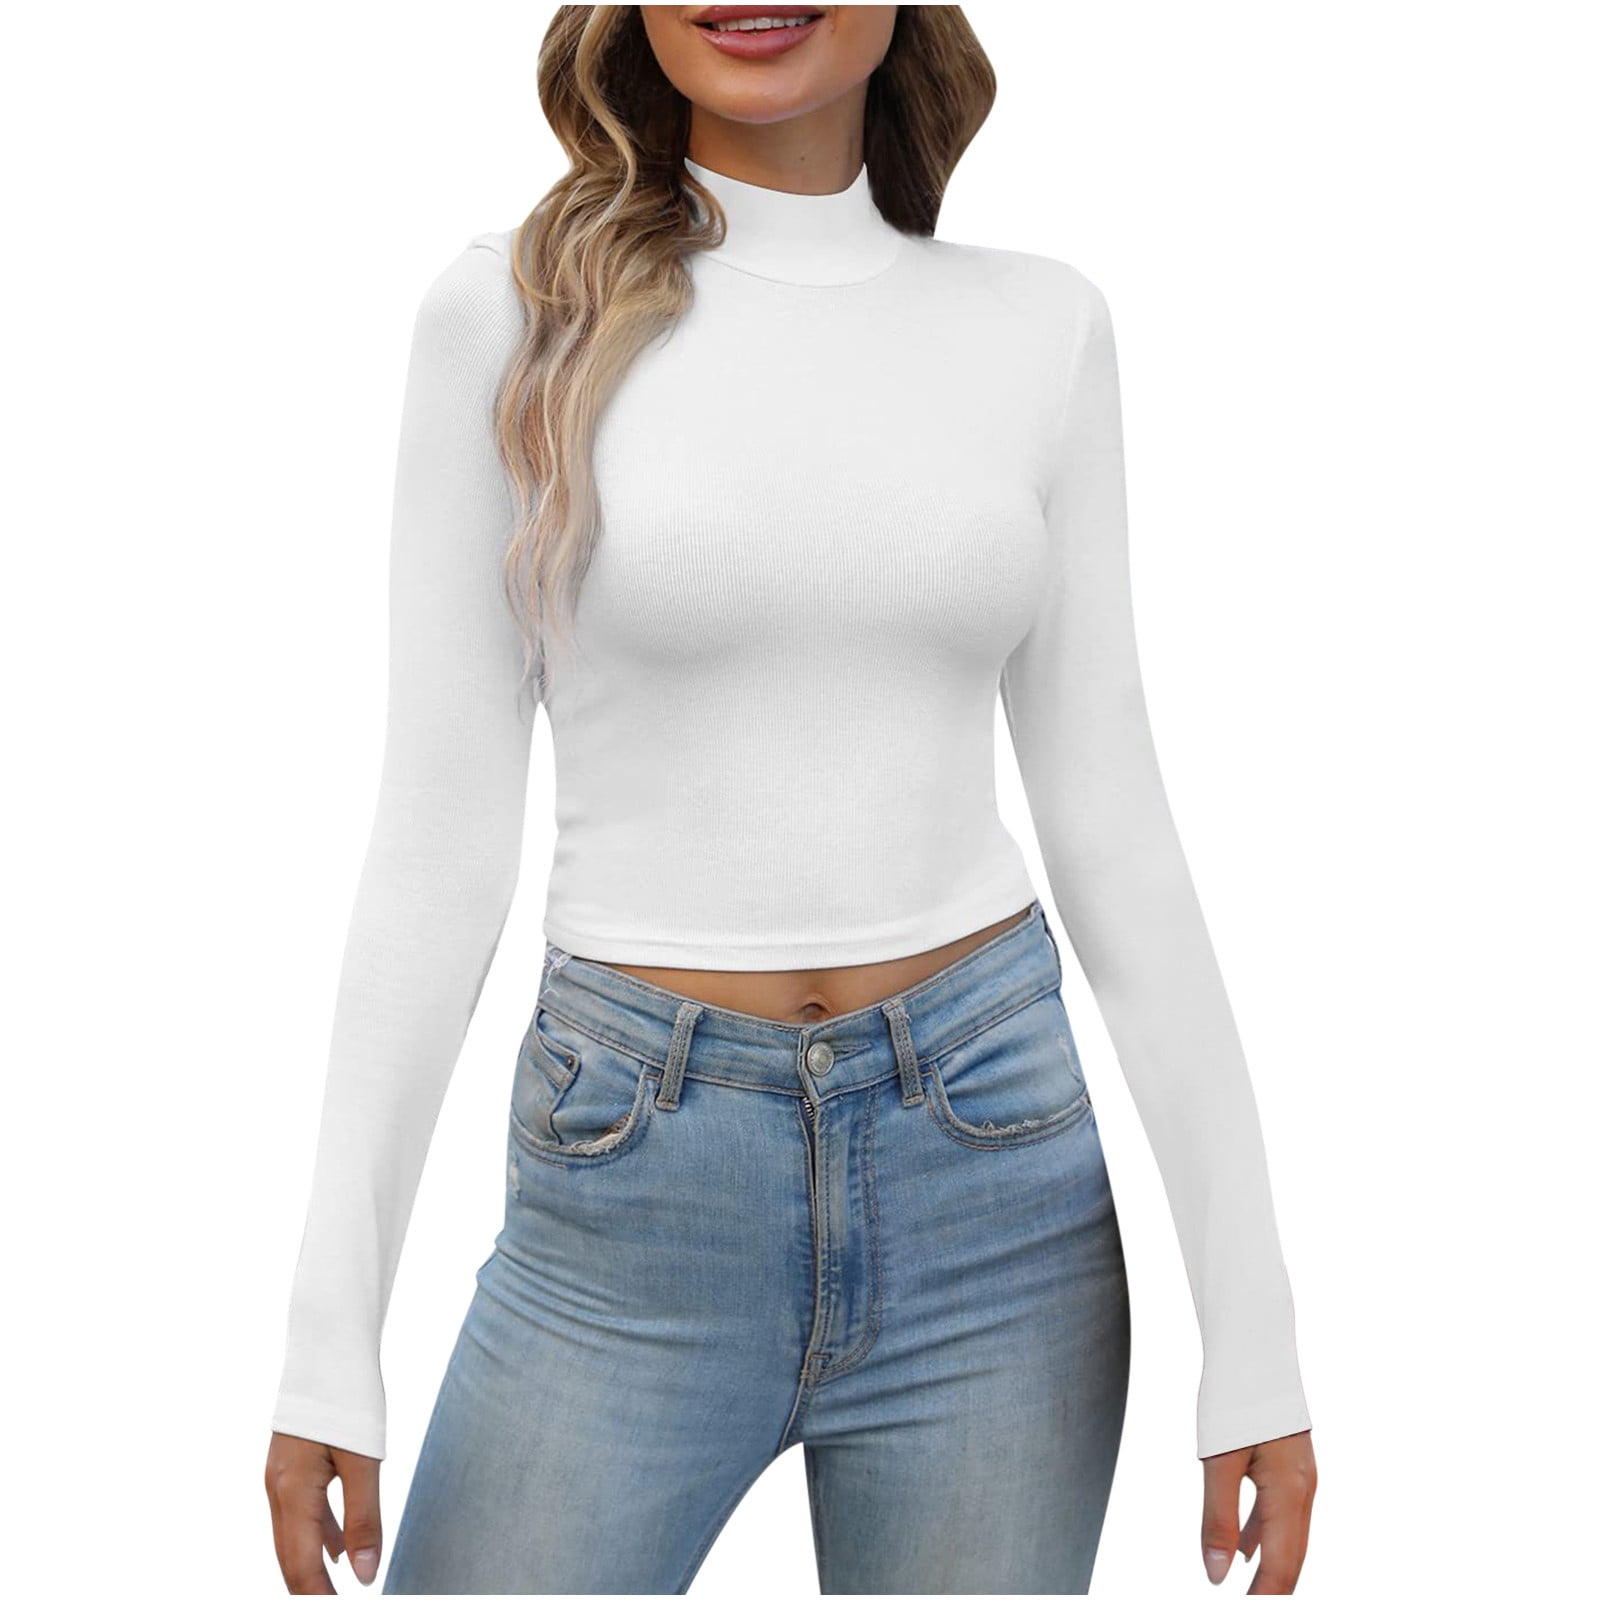 XFLWAM Women's Long Sleeve Crop Top Quick Dry Cropped Workout Shirts Half  Zip Pullover Running Athletic Shirt White M 